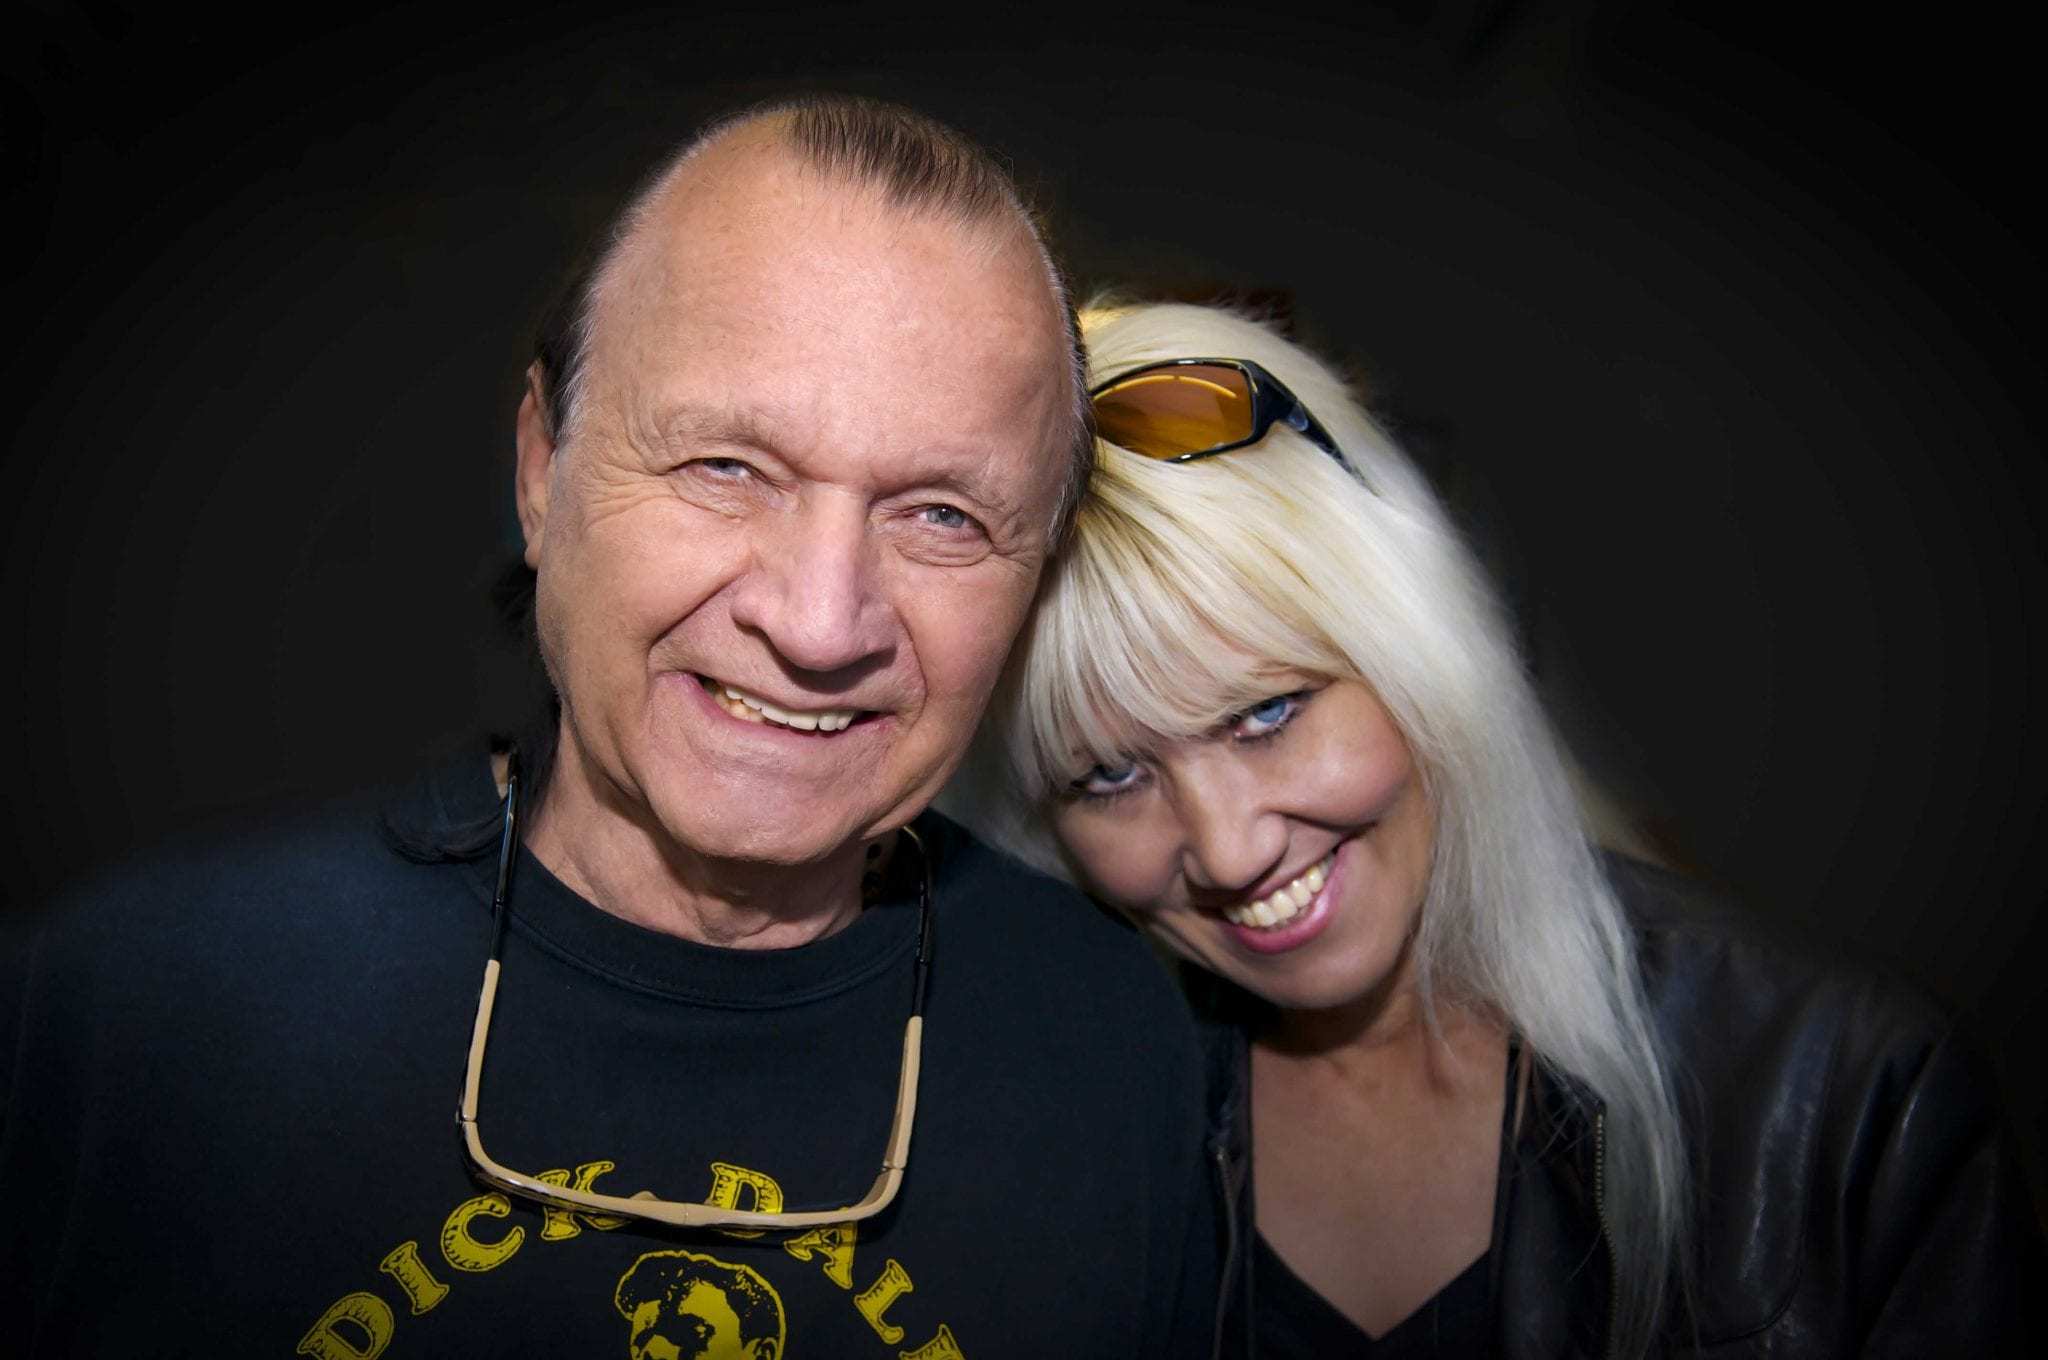 Dick Dale, King of the Surf Guitar